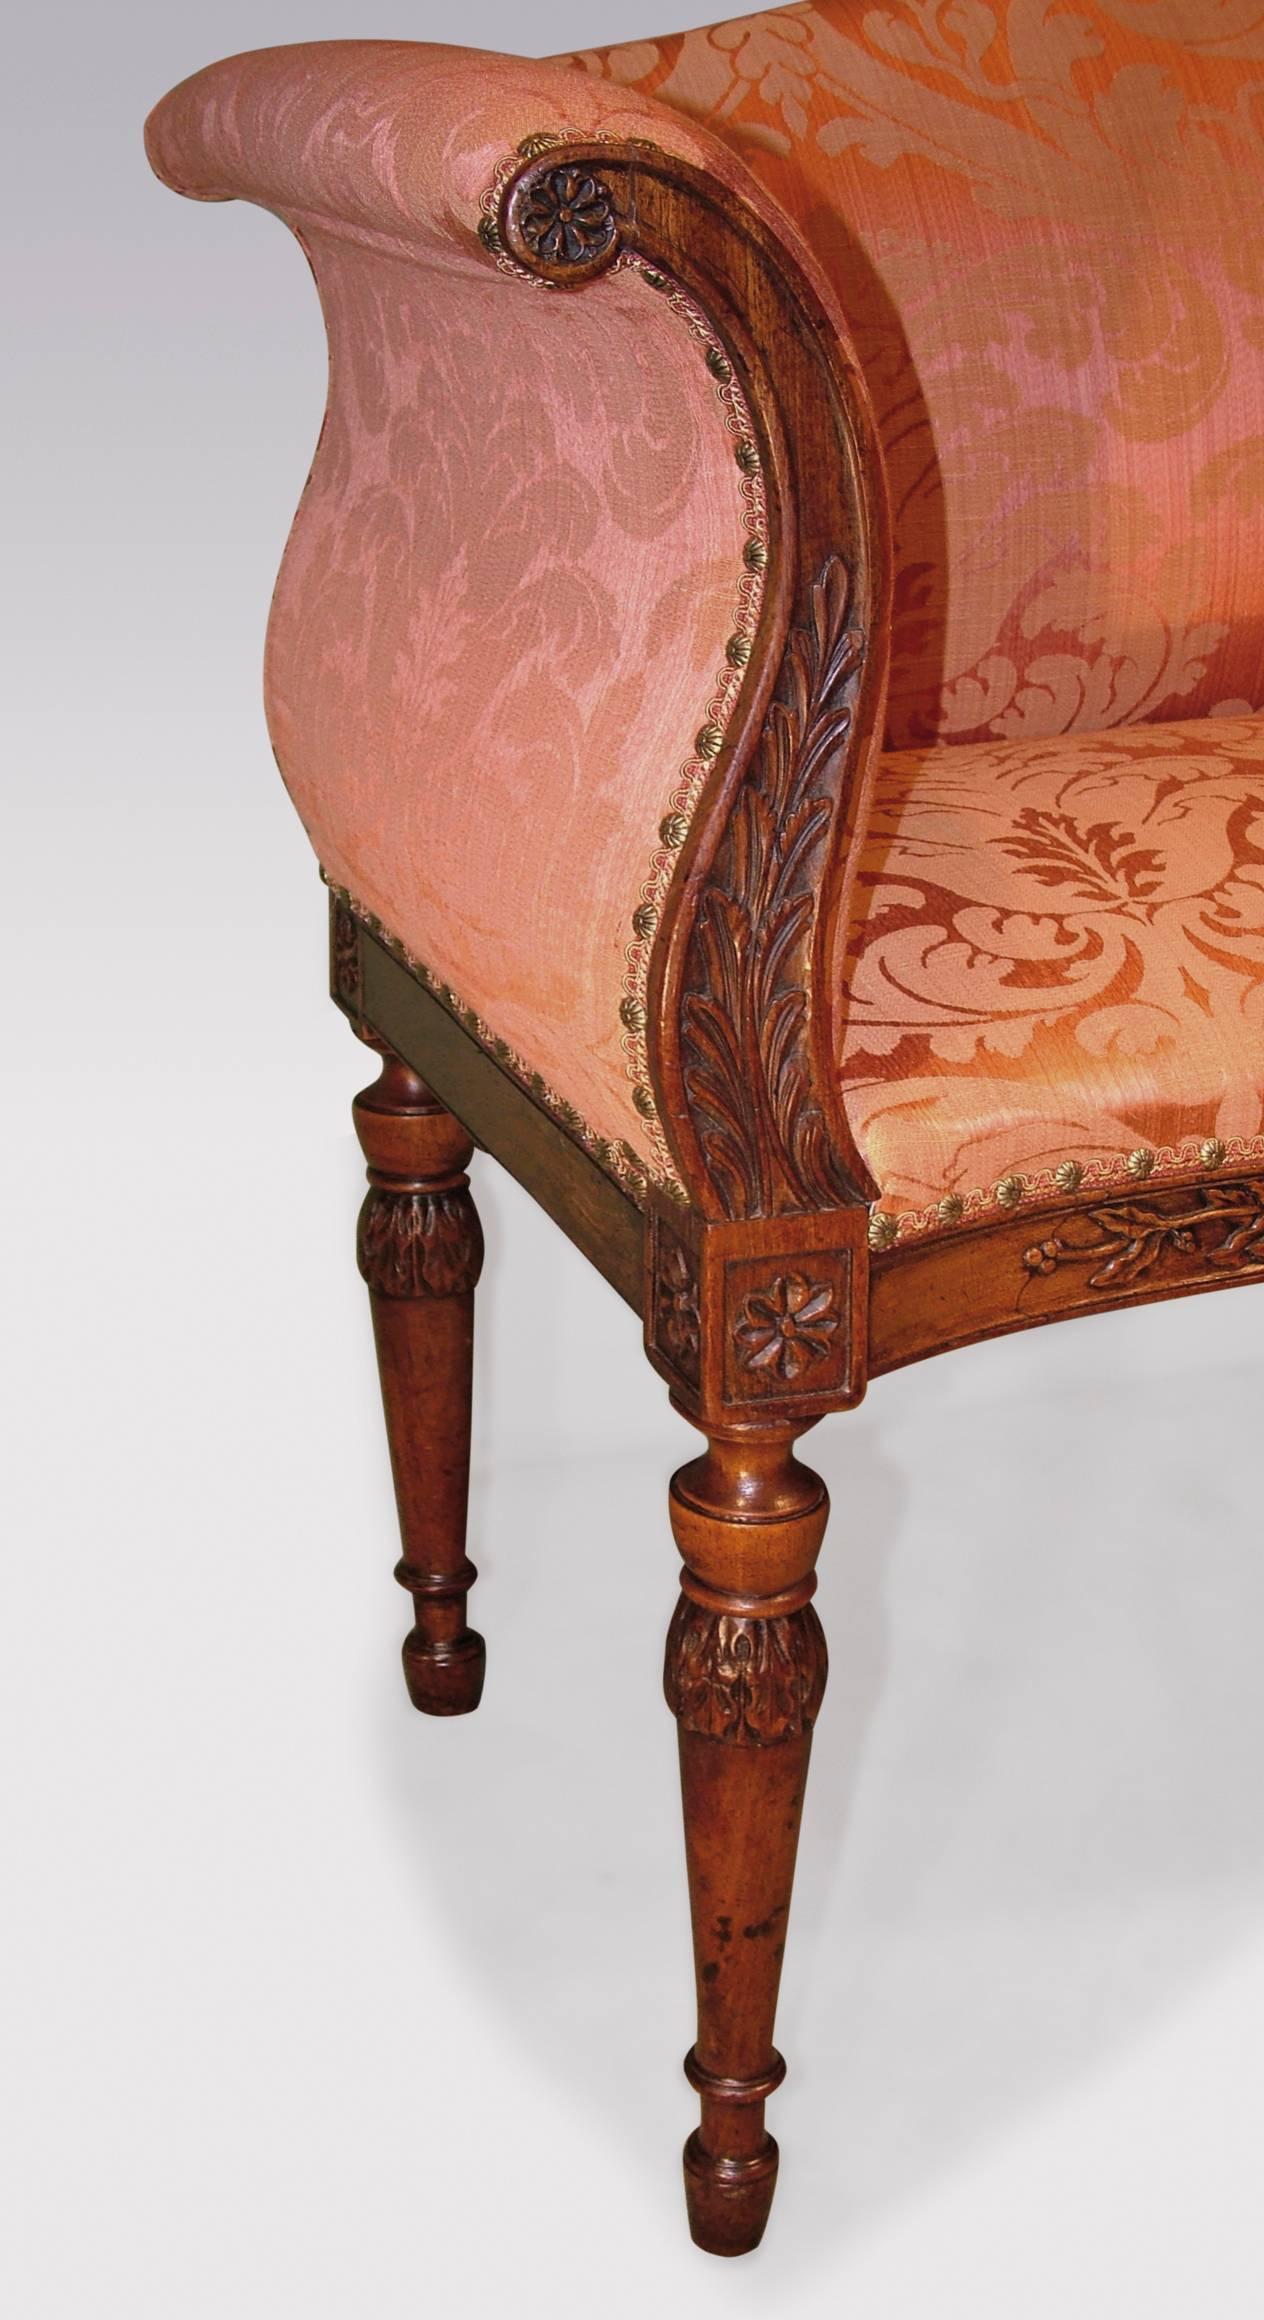 An unusual late 18th century Adam period carved mahogany window seat, having serpentine back and seat with scrolled out-swept arms, decorated with roundels, paterae and acanthus leaves, having central urn motif to the frieze, raised on leaf carved